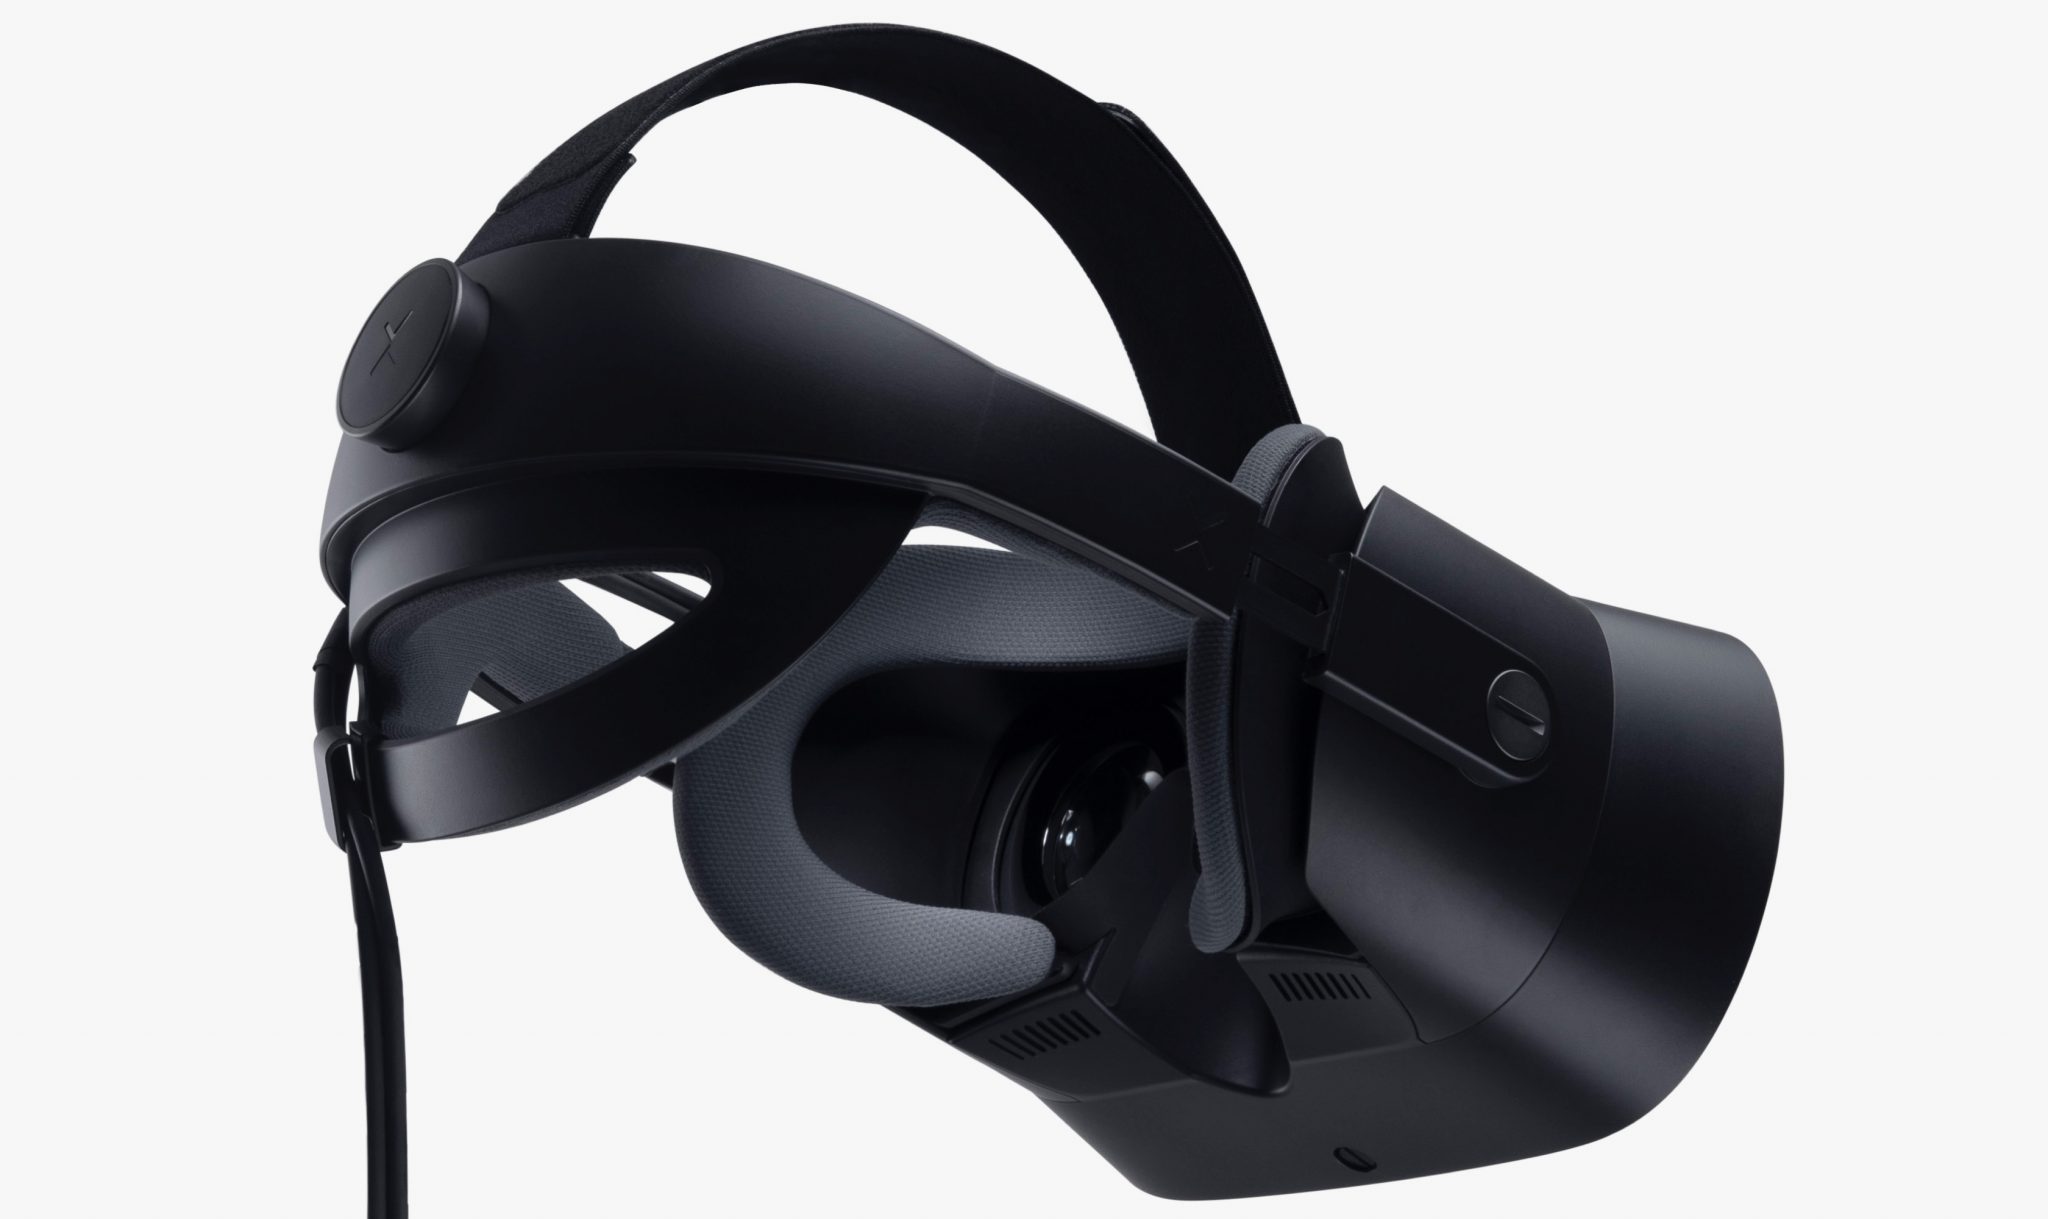 Retina Resolution VR Headsets Promise Users the “Reality ...